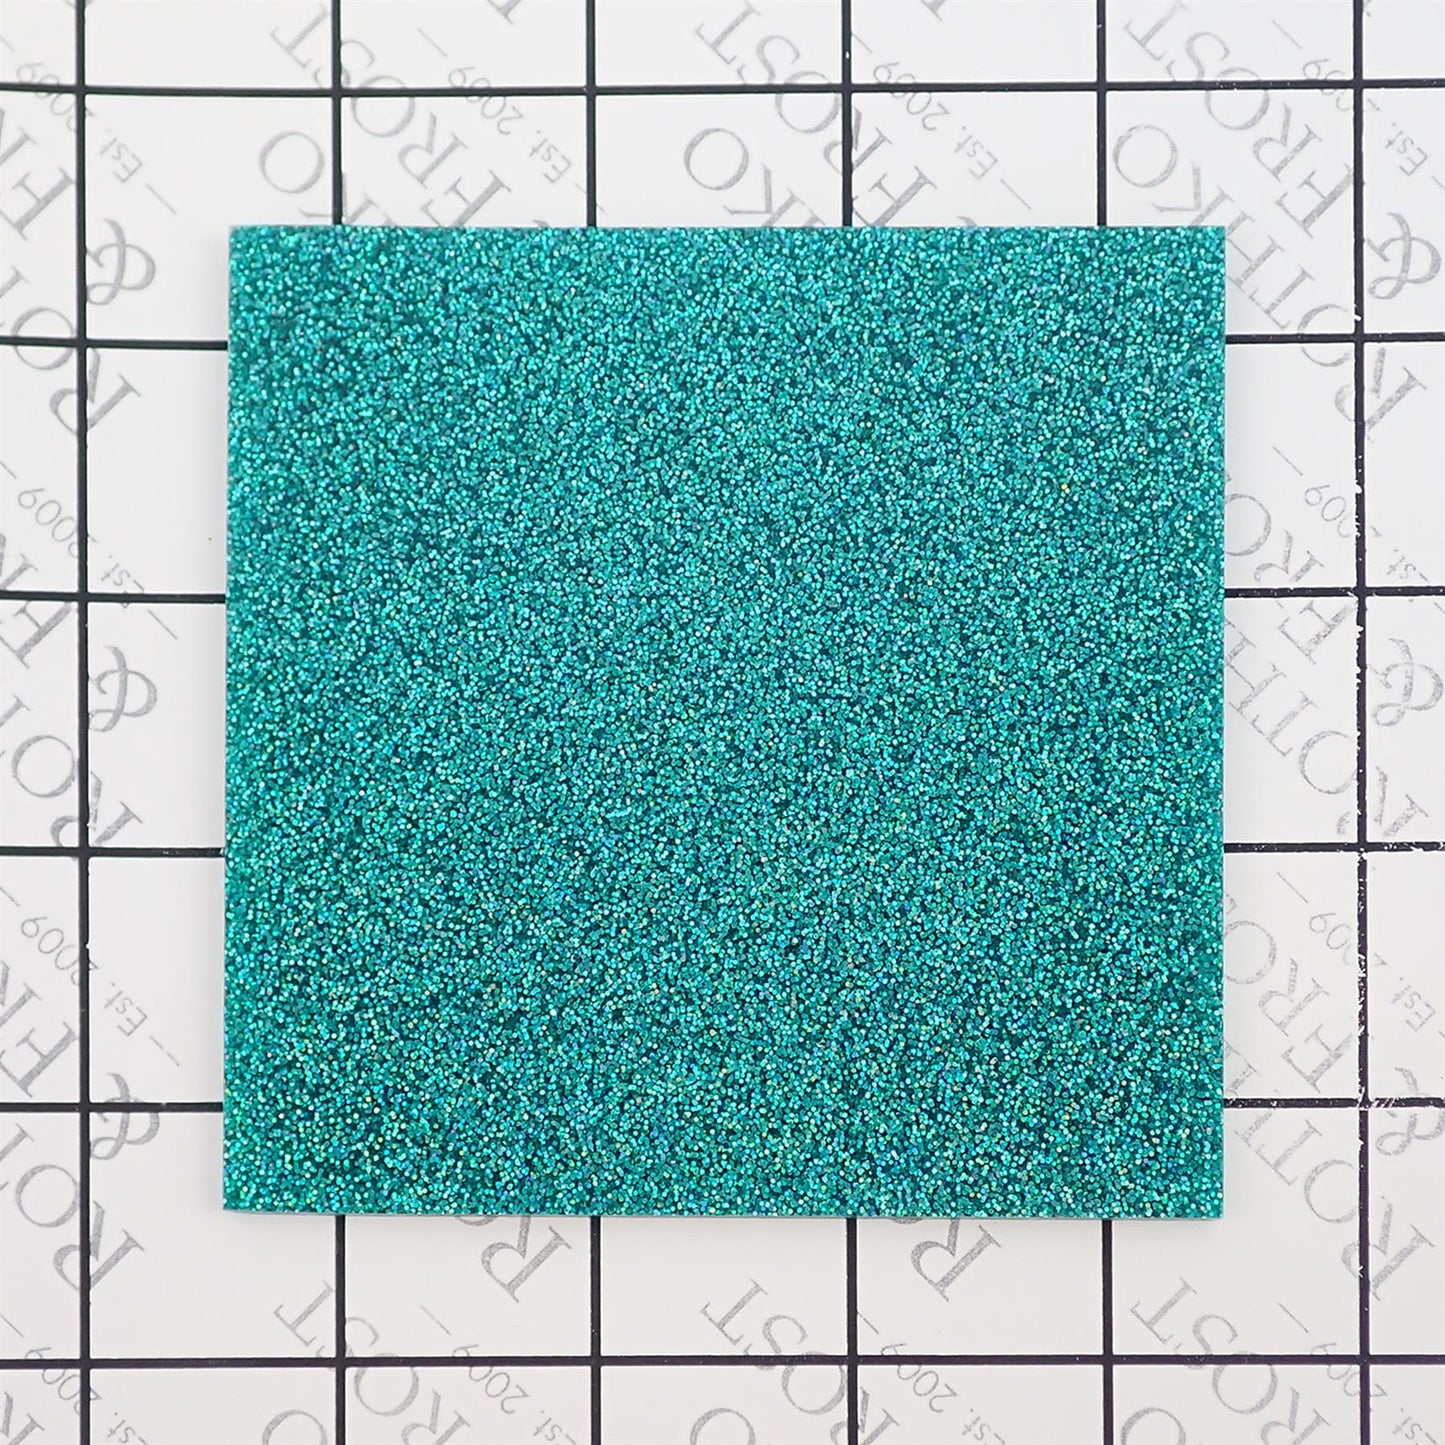 Incudo Emerald Green 2-Sided Holographic Glitter Acrylic Sheet - 400x300x3mm (15.7x11.81x0.12")